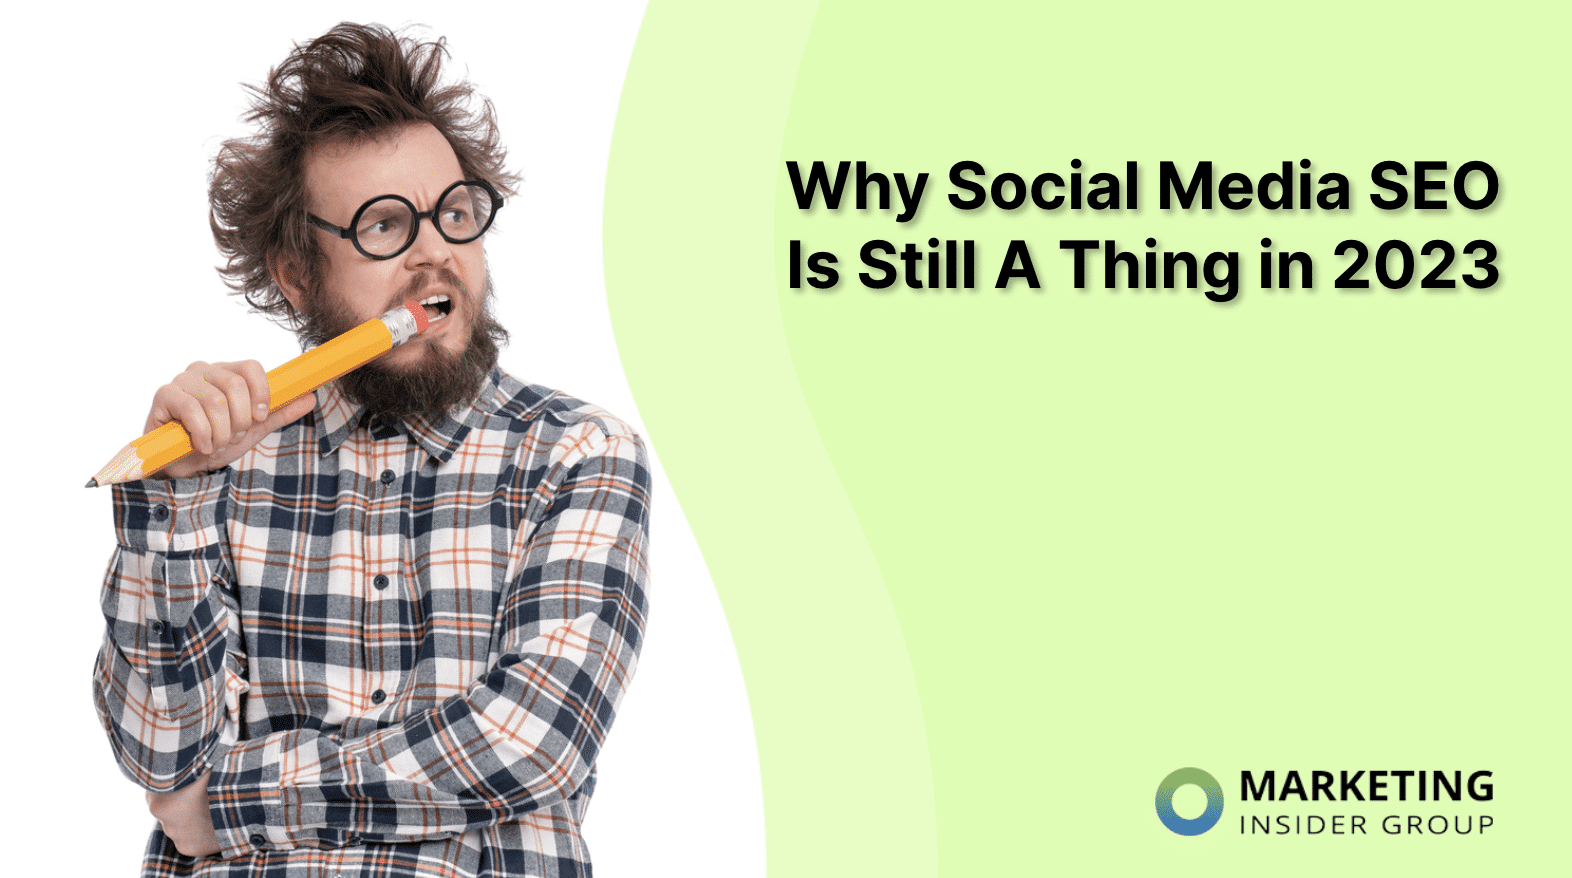 Why Social Media SEO Is a Thing in 2023